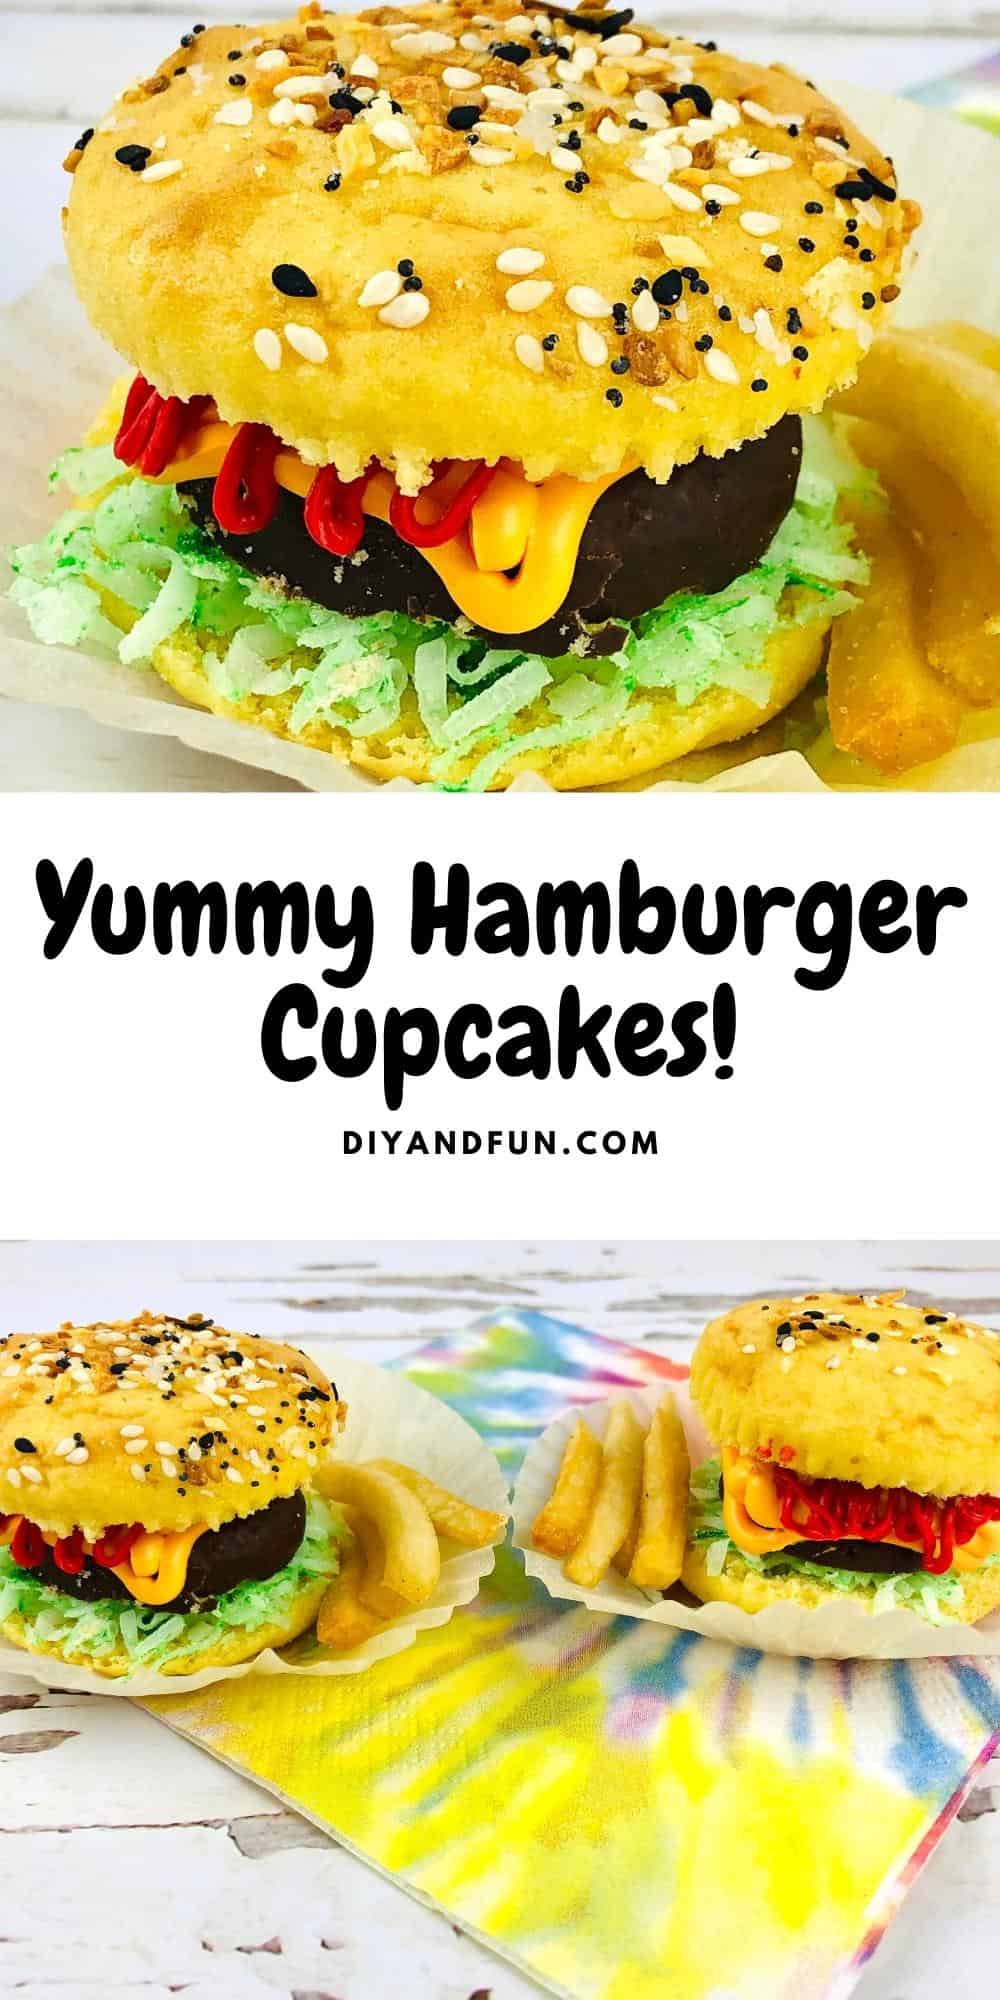 Yummy Cheeseburger Cupcakes, a simple recipe for turning plain cupcakes into what looks like a cheeseburger.